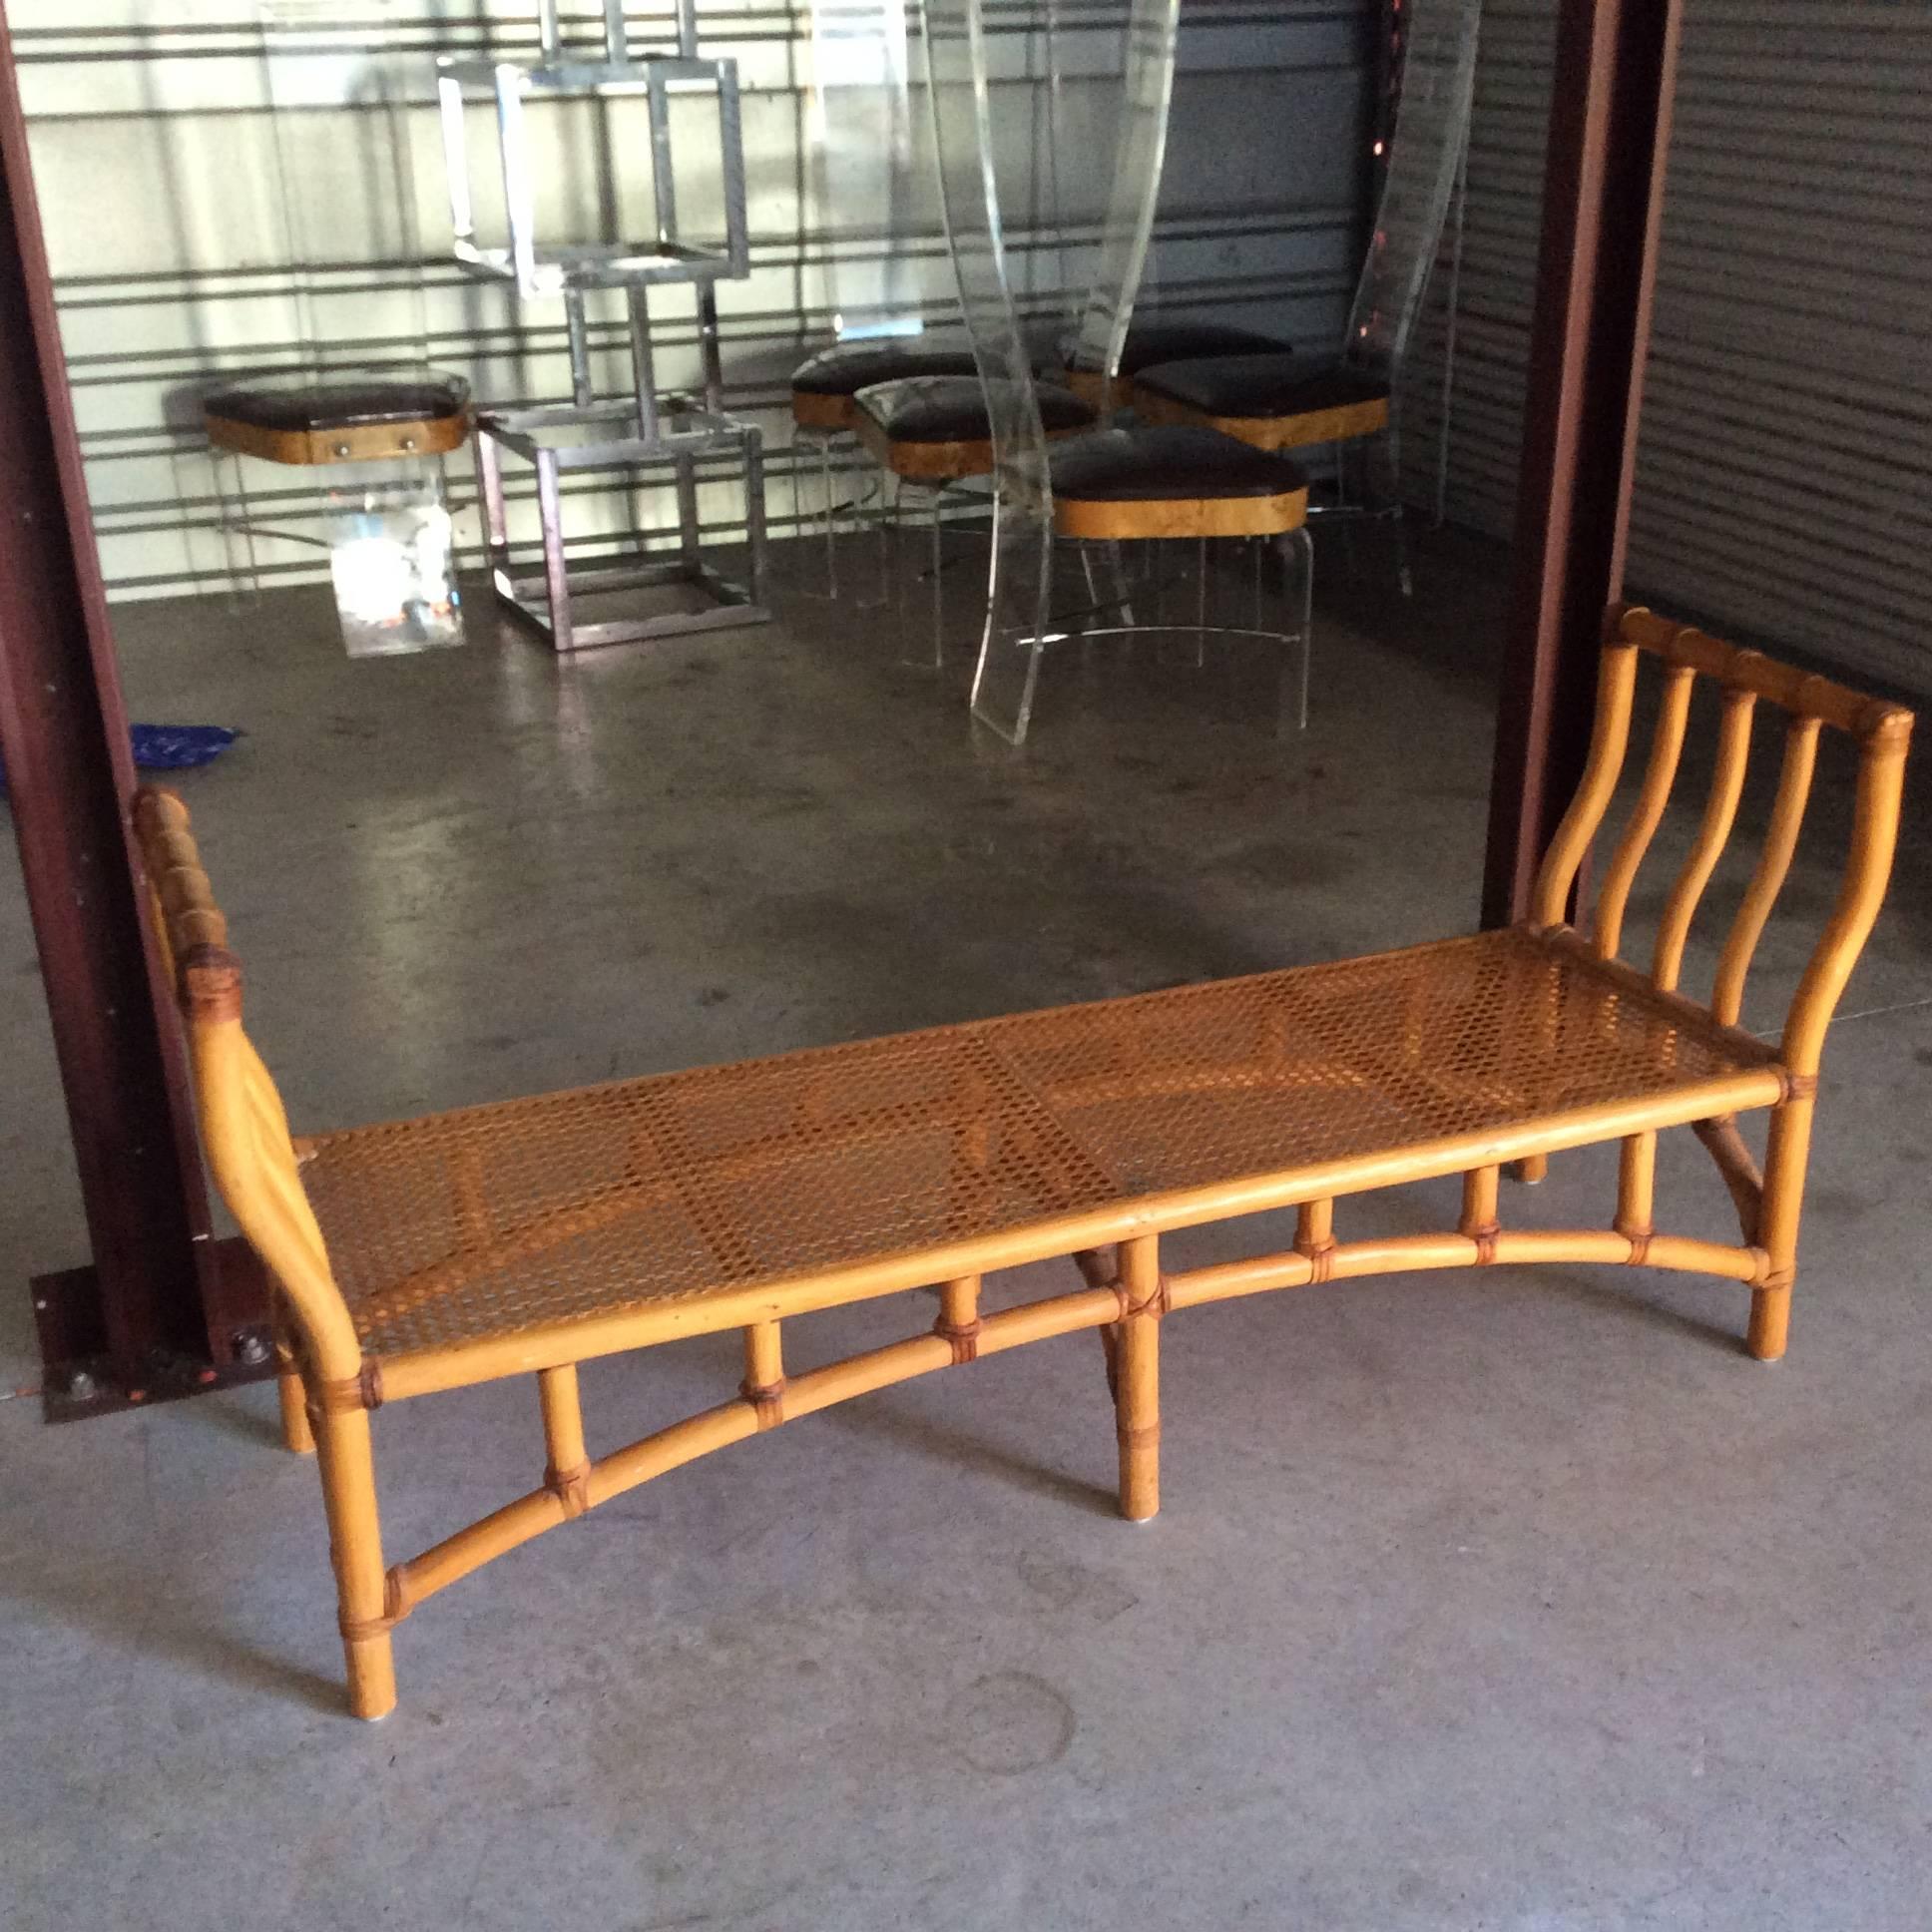 Lovely rattan faux bamboo bench perfect for the end of the bed, entry or foyer, porch or patio, etc. Cane set is in excellent condition as well! Leave as is or add a pretty cushion! 
Hollywood Regency, Palm Beach, chinoiserie, Chinese Chippendale,